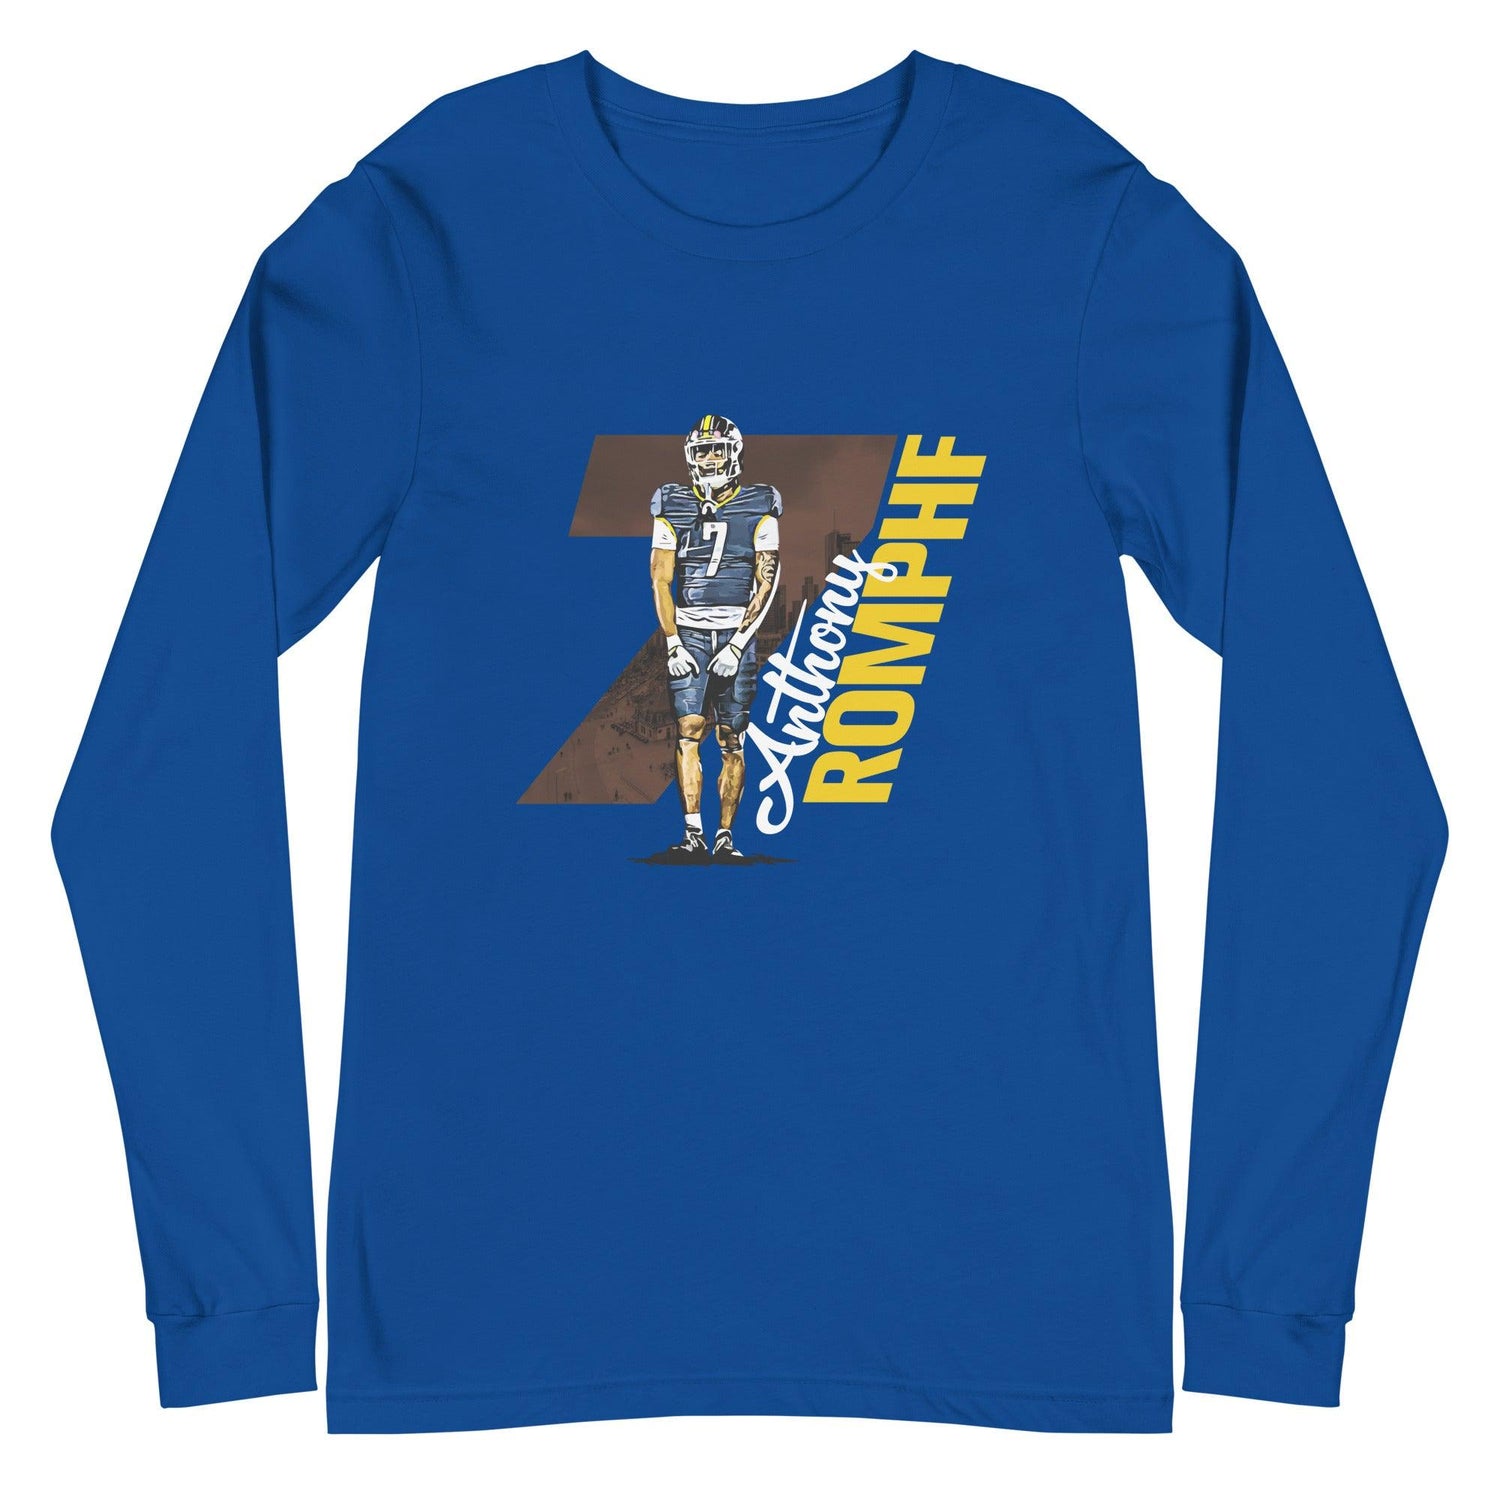 Anthony Romphf "Gameday" Long Sleeve Tee - Fan Arch